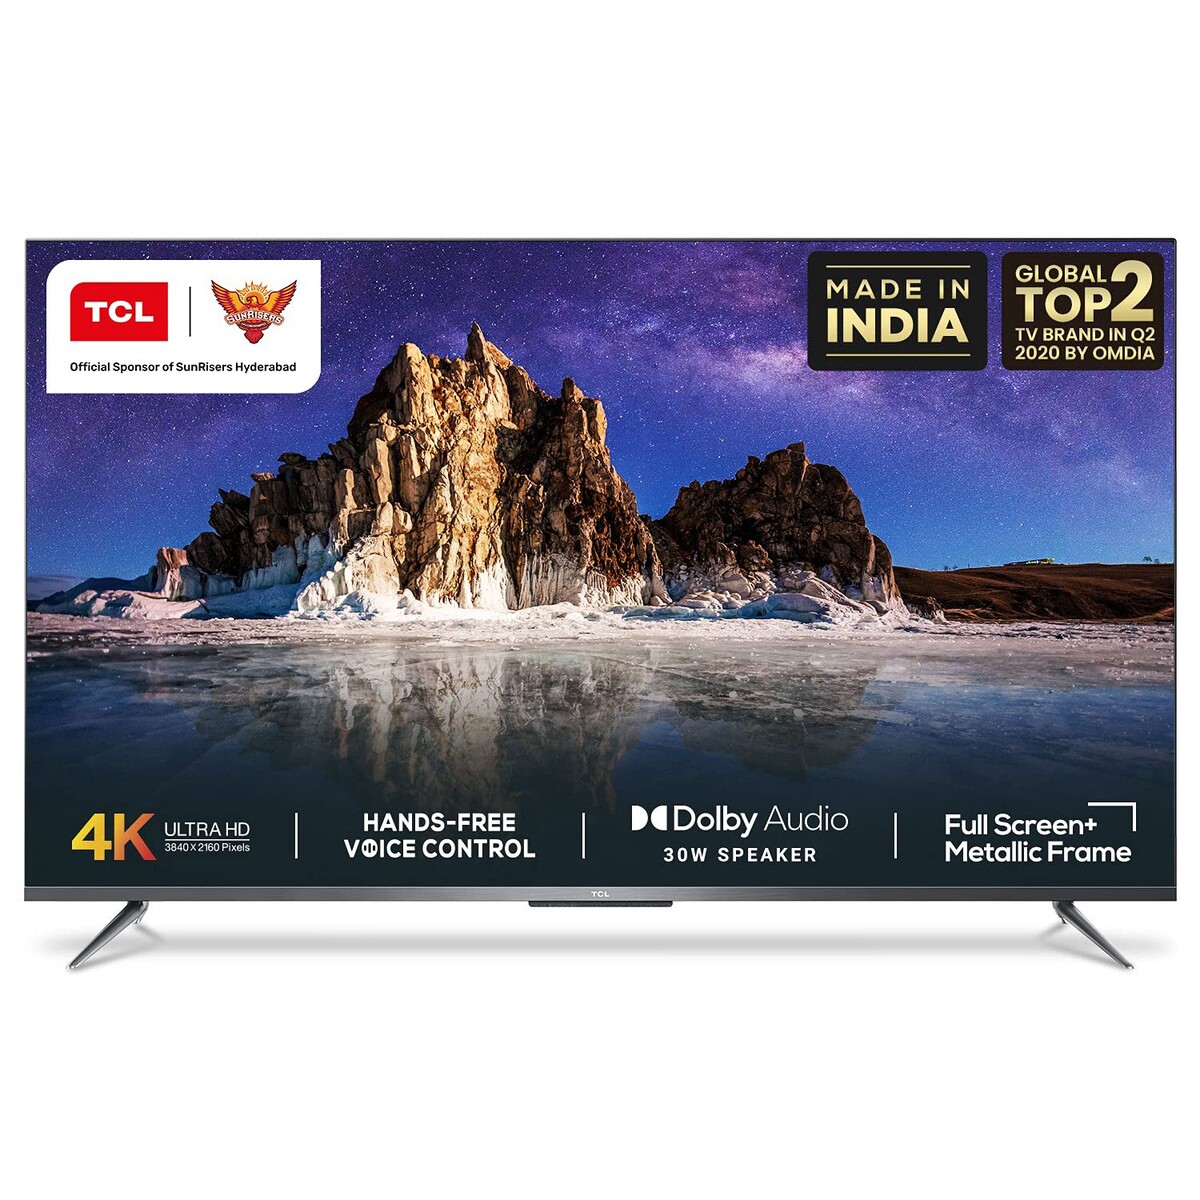 TCL 4K Ultra HD Android Smart LED TV 55P715 55"